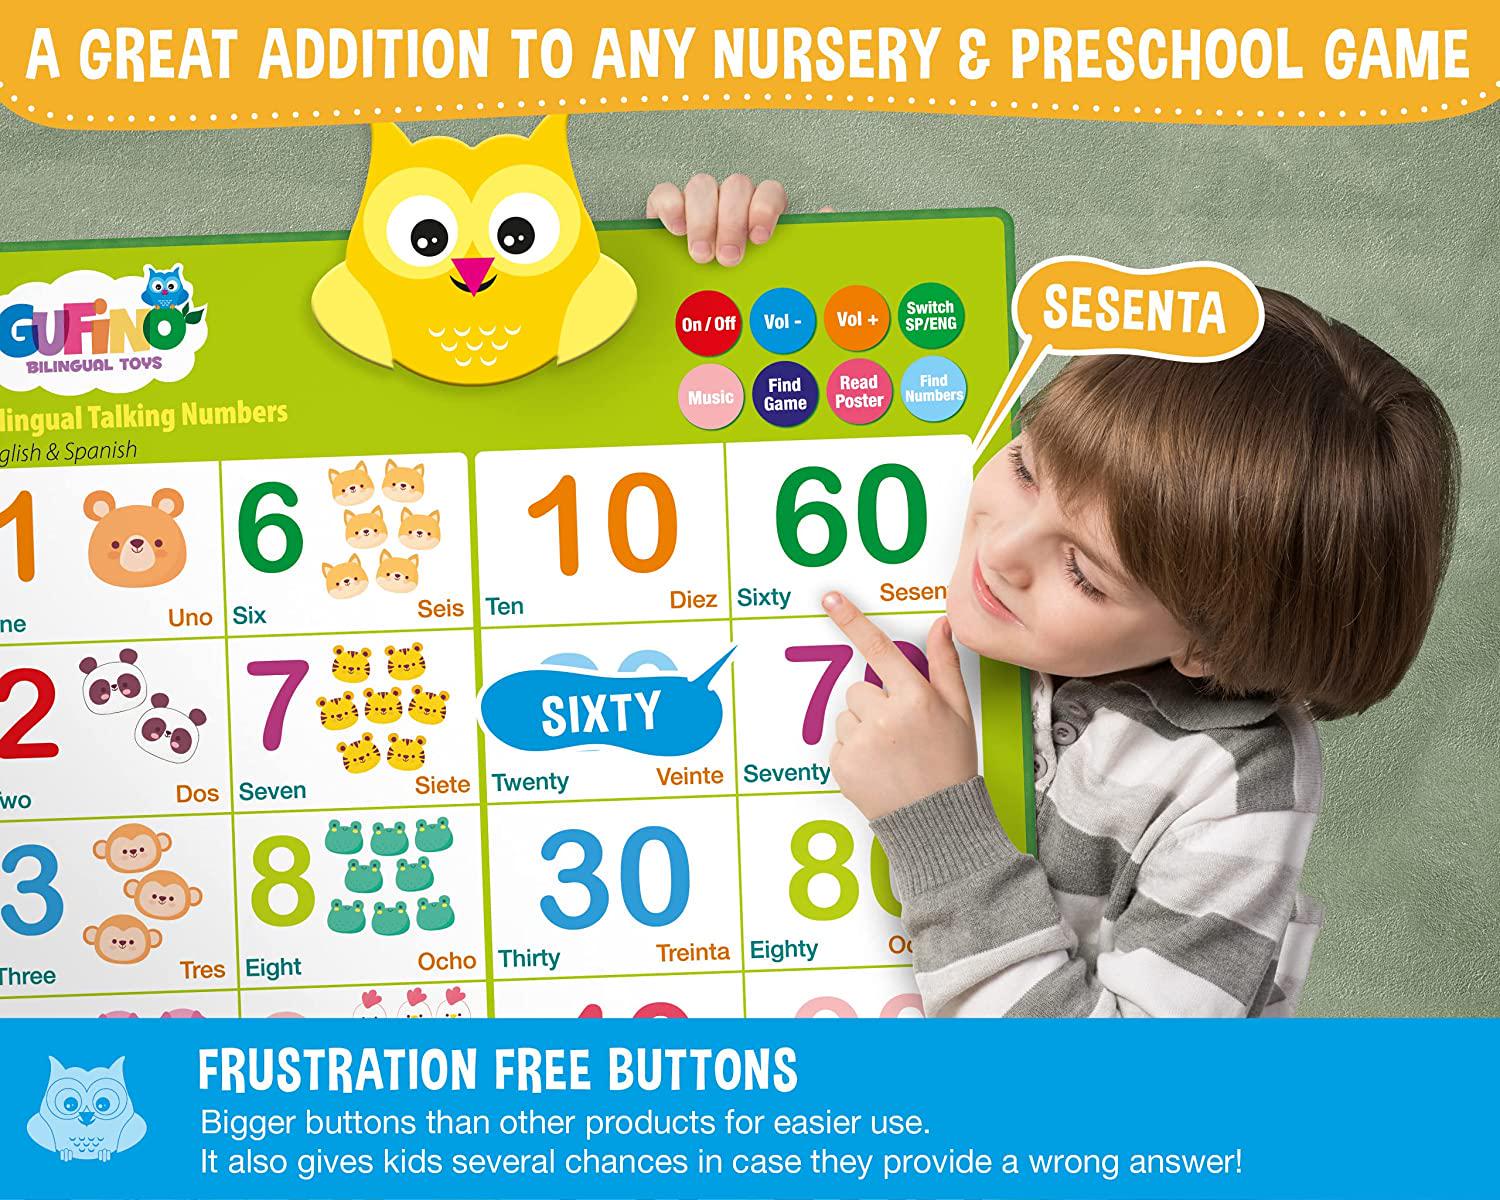 LVAP, LVAP Talking Number Poster for Toddlers - English and Spanish Learning for Toddlers. Numbers, Colors, Songs! Educational Toys for 2 Year Old Kids and Older. Best Learning and Education Toys